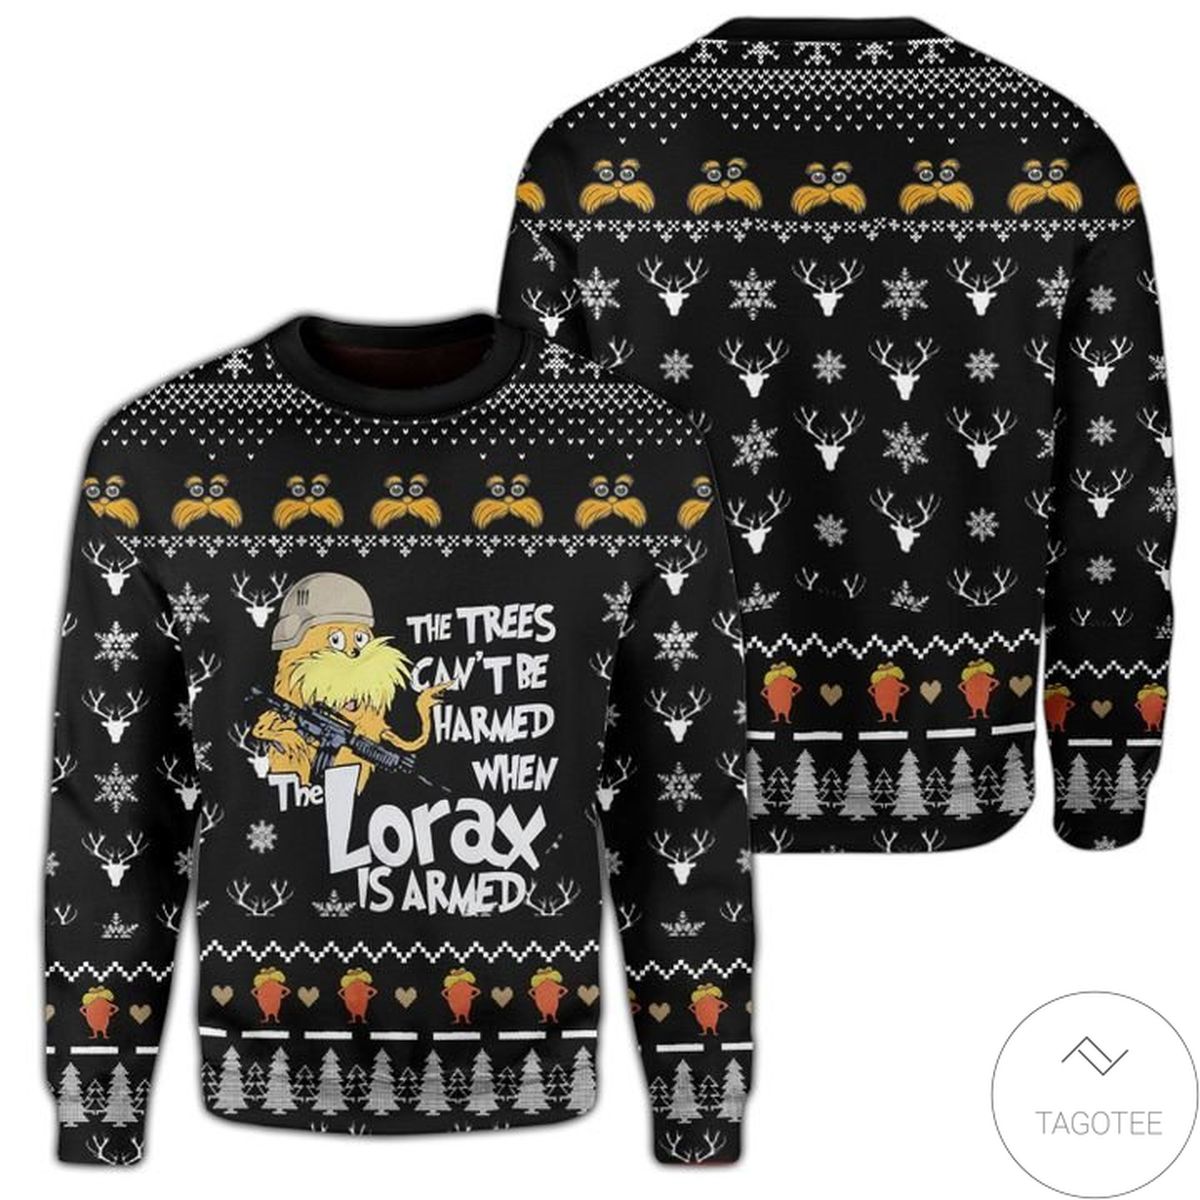 The Trees Can't Be Harmed If The Lorax Is Armed Ugly Christmas Sweater